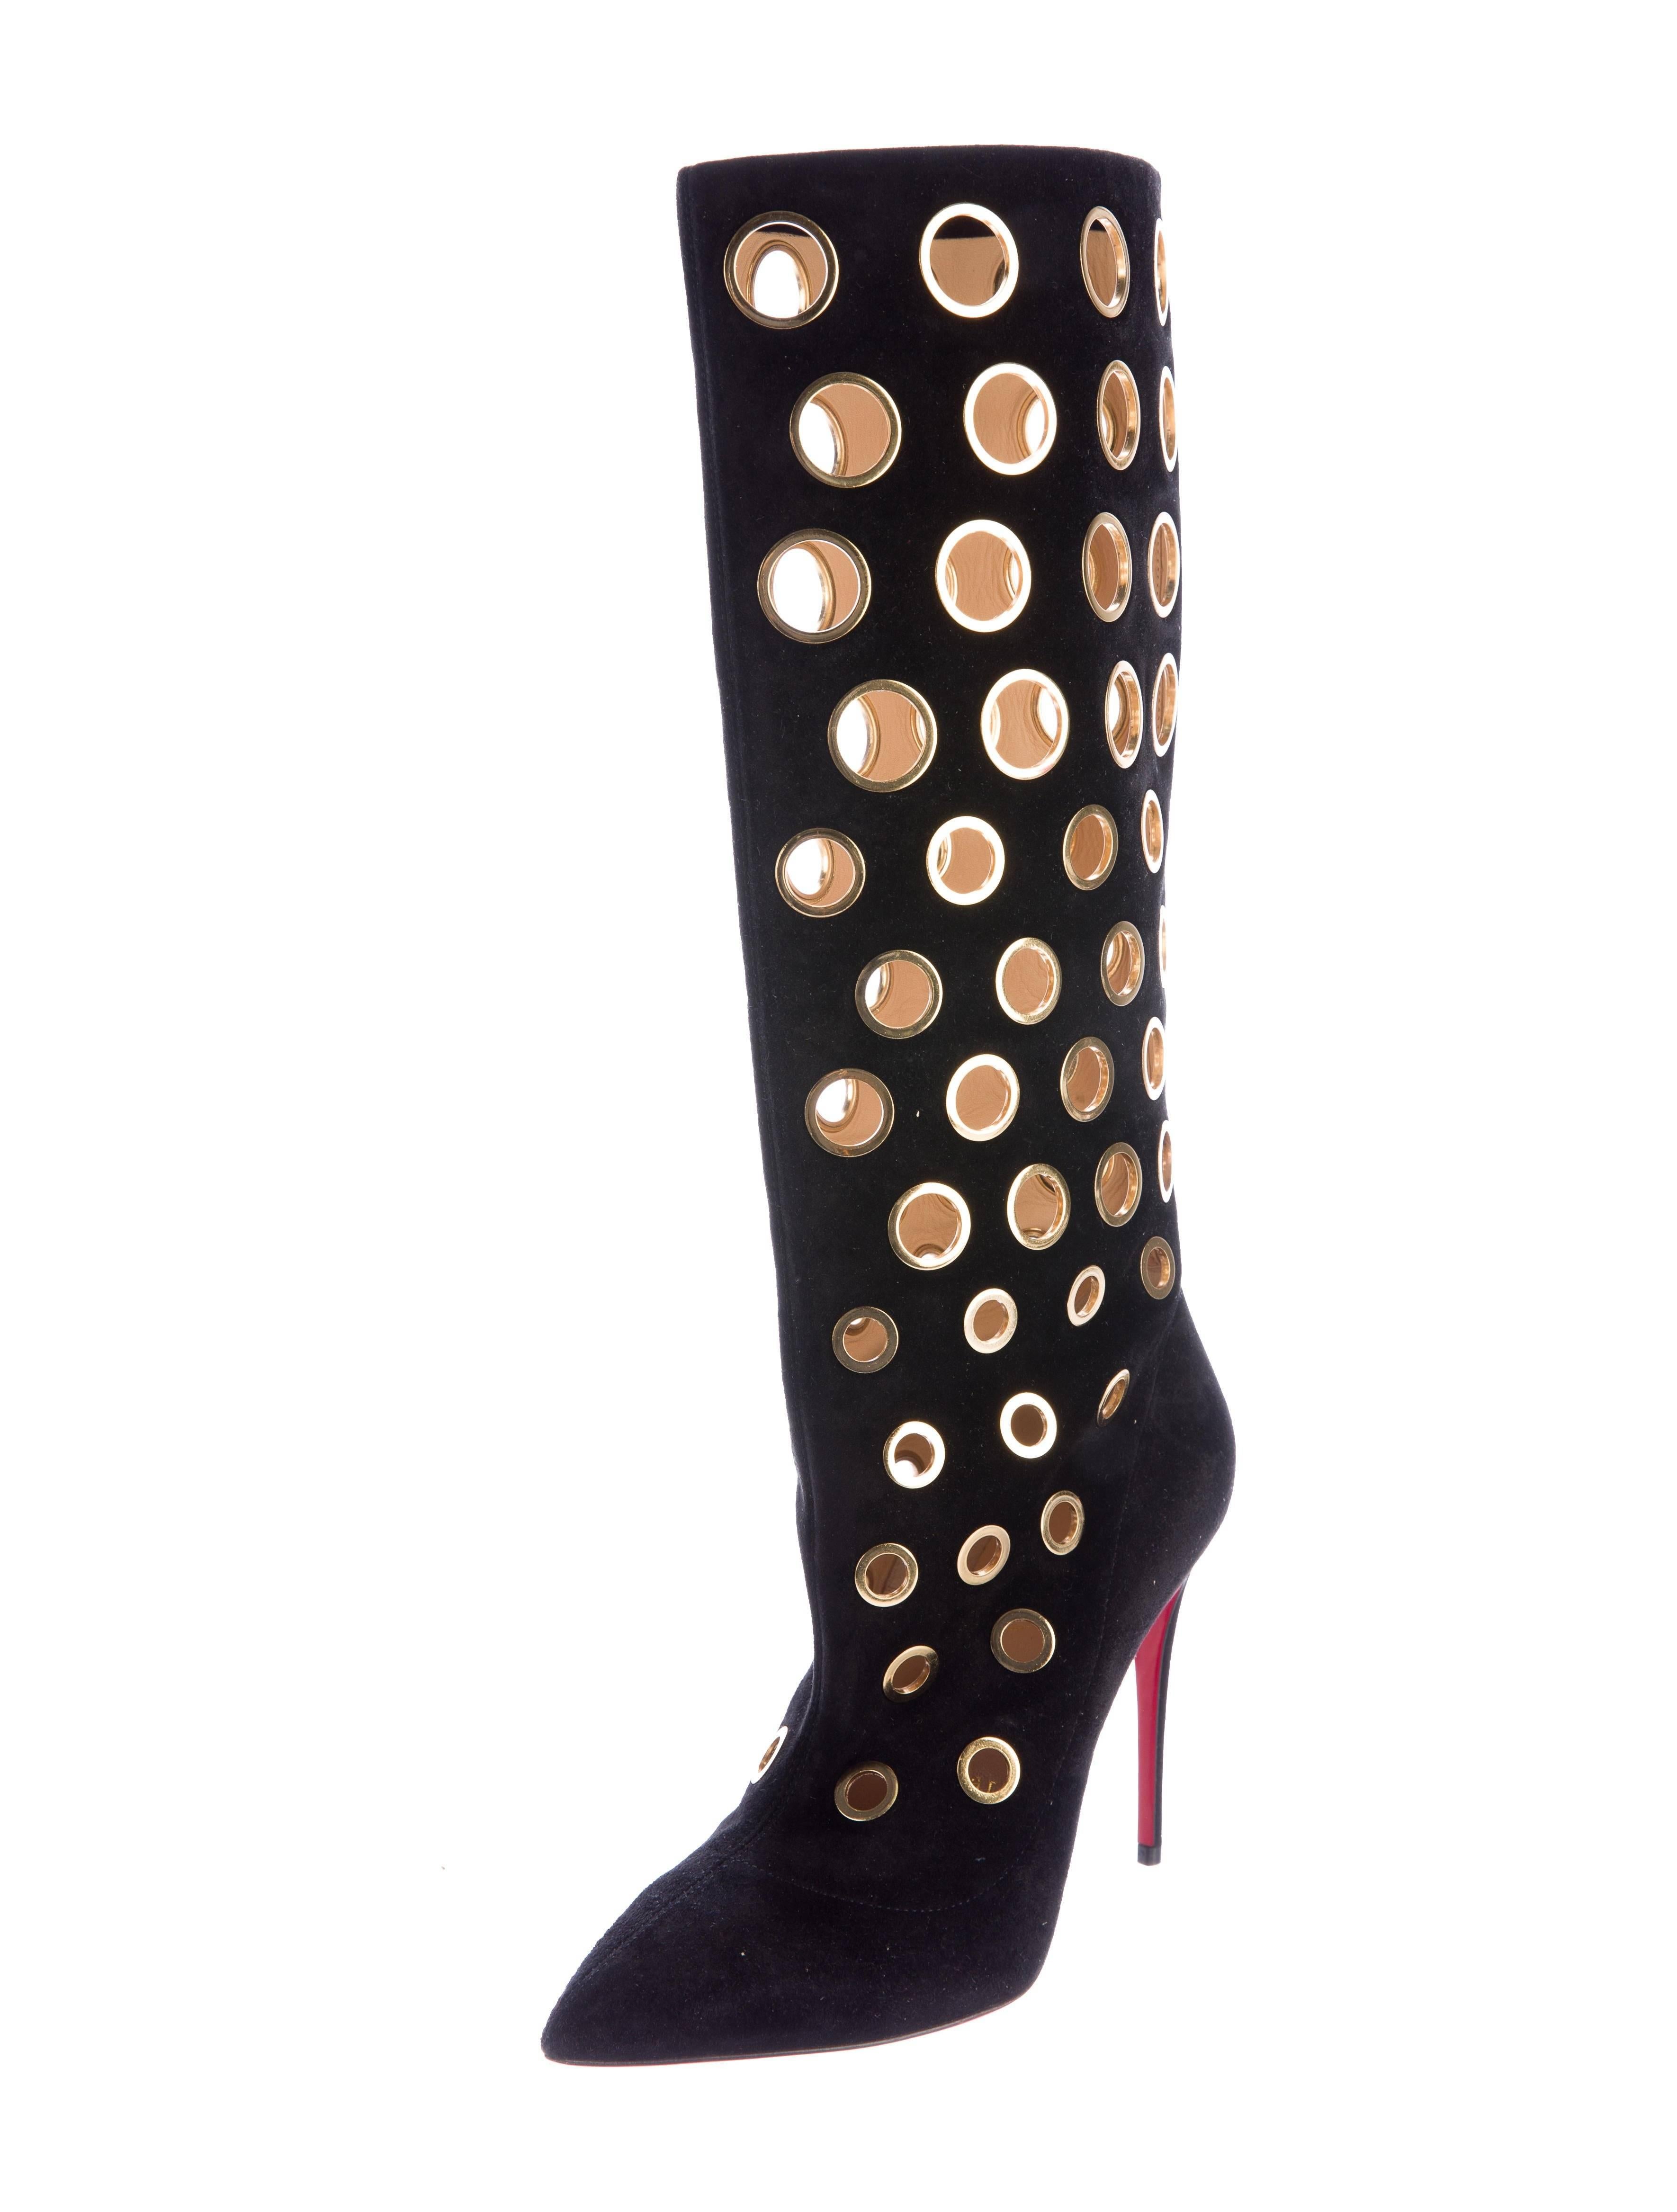 CURATOR'S NOTES

ONLY PAIR! Christian Louboutin New Black Suede Gold Cut Out Knee High Heels Boots in Box 

Size IT 36.5
Suede
Gold tone hardware 
Slip on
Made in Italy
Calf circumference 13"
Shaft 12.5"
Heel height 4.5"
Includes